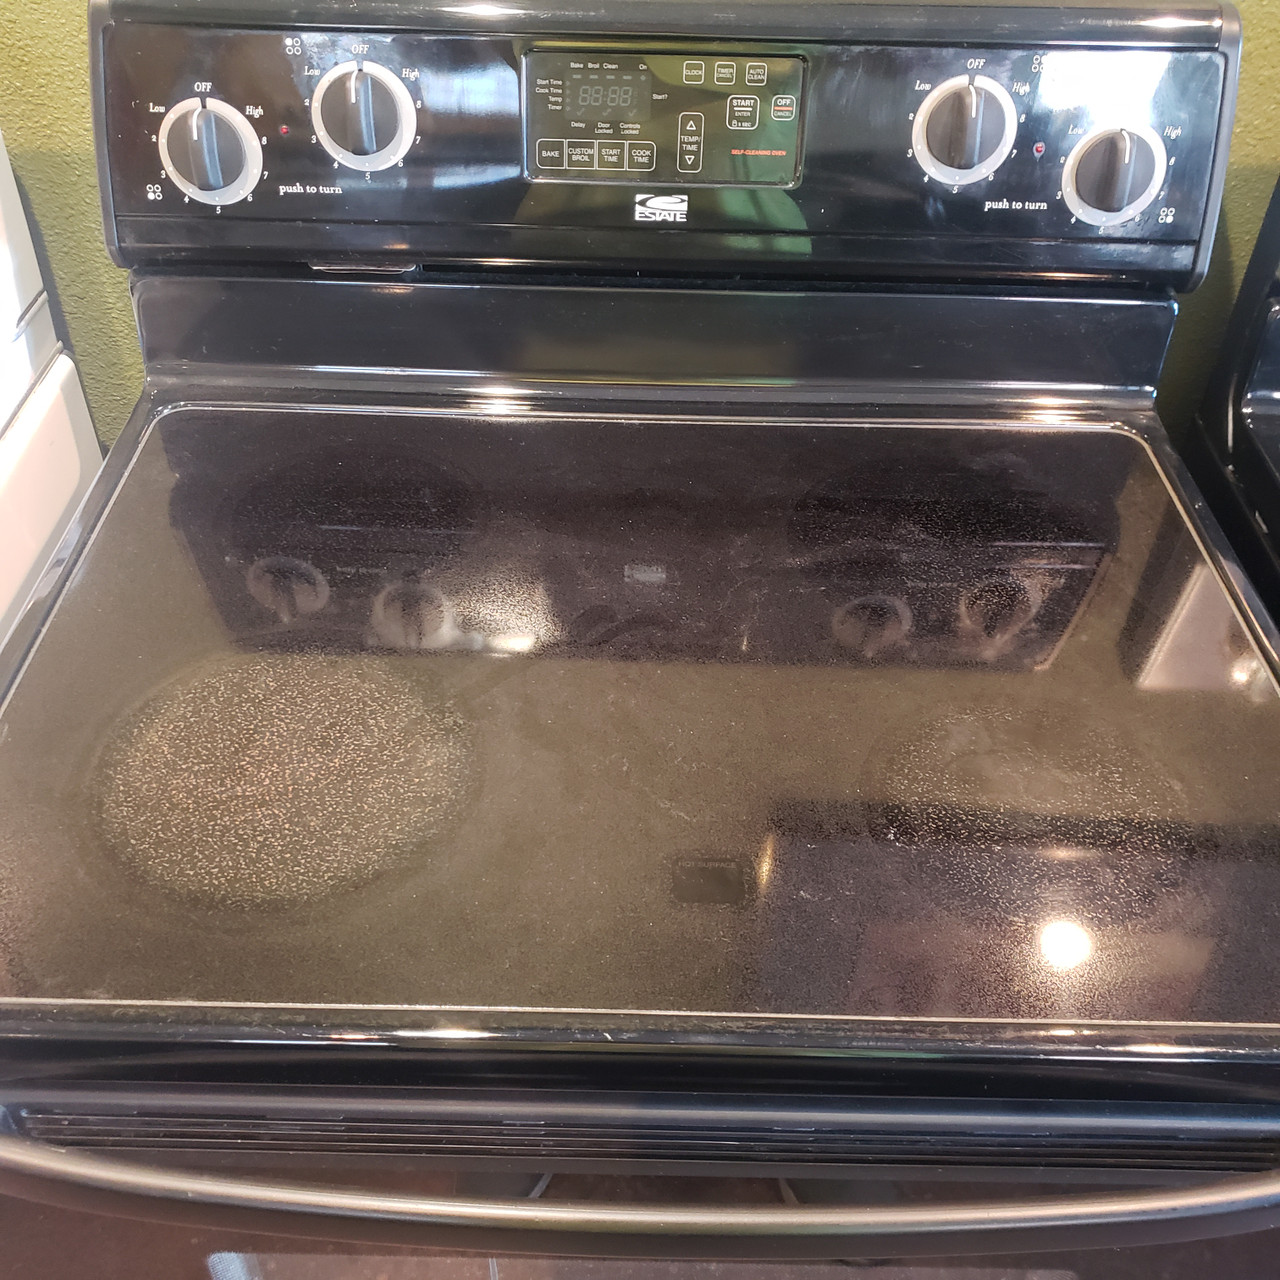 FRIGIDAIRE 30 INCH FREE STANDING SMOOTH TOP ELECTRIC RANGE 4